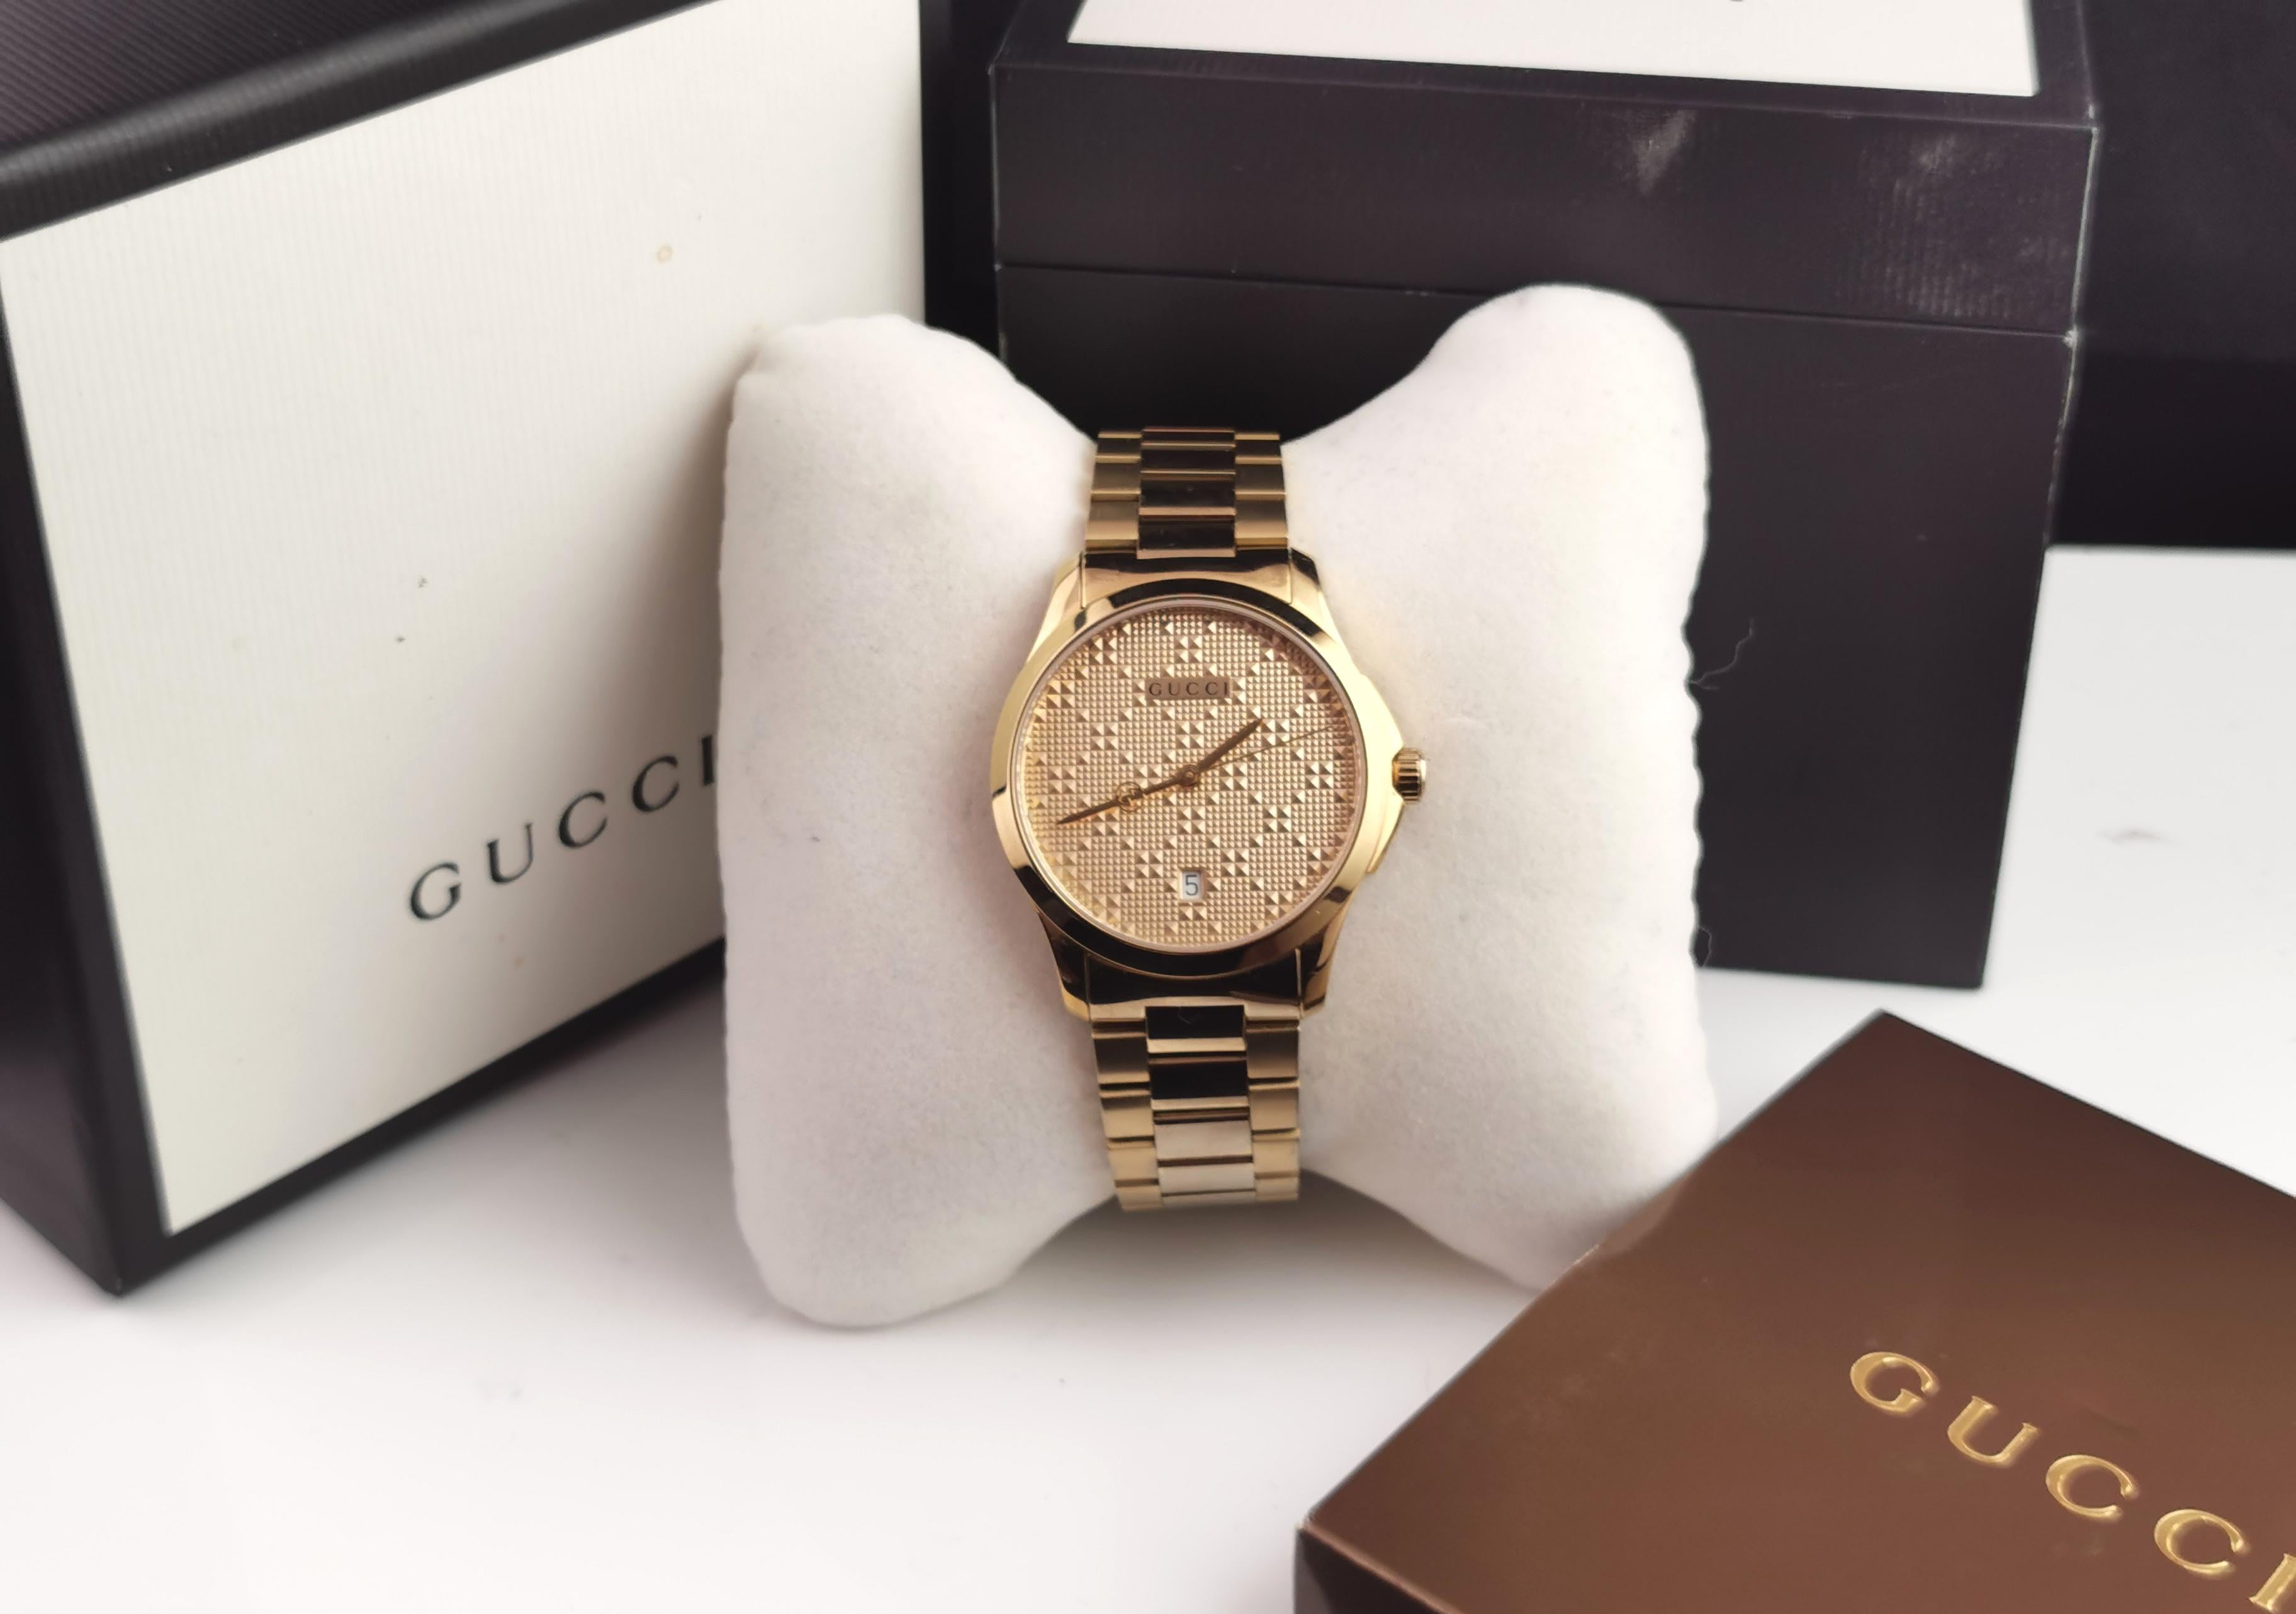 This is truly a luxury watch produced by Gucci.

It is the Gucci G Timeless 126.4 gentlemans wristwatch.

Fully gold tone with a chunky heavy bracelet strap and textured gold tone dial the second hand featuring the Gucci logo and branded to the